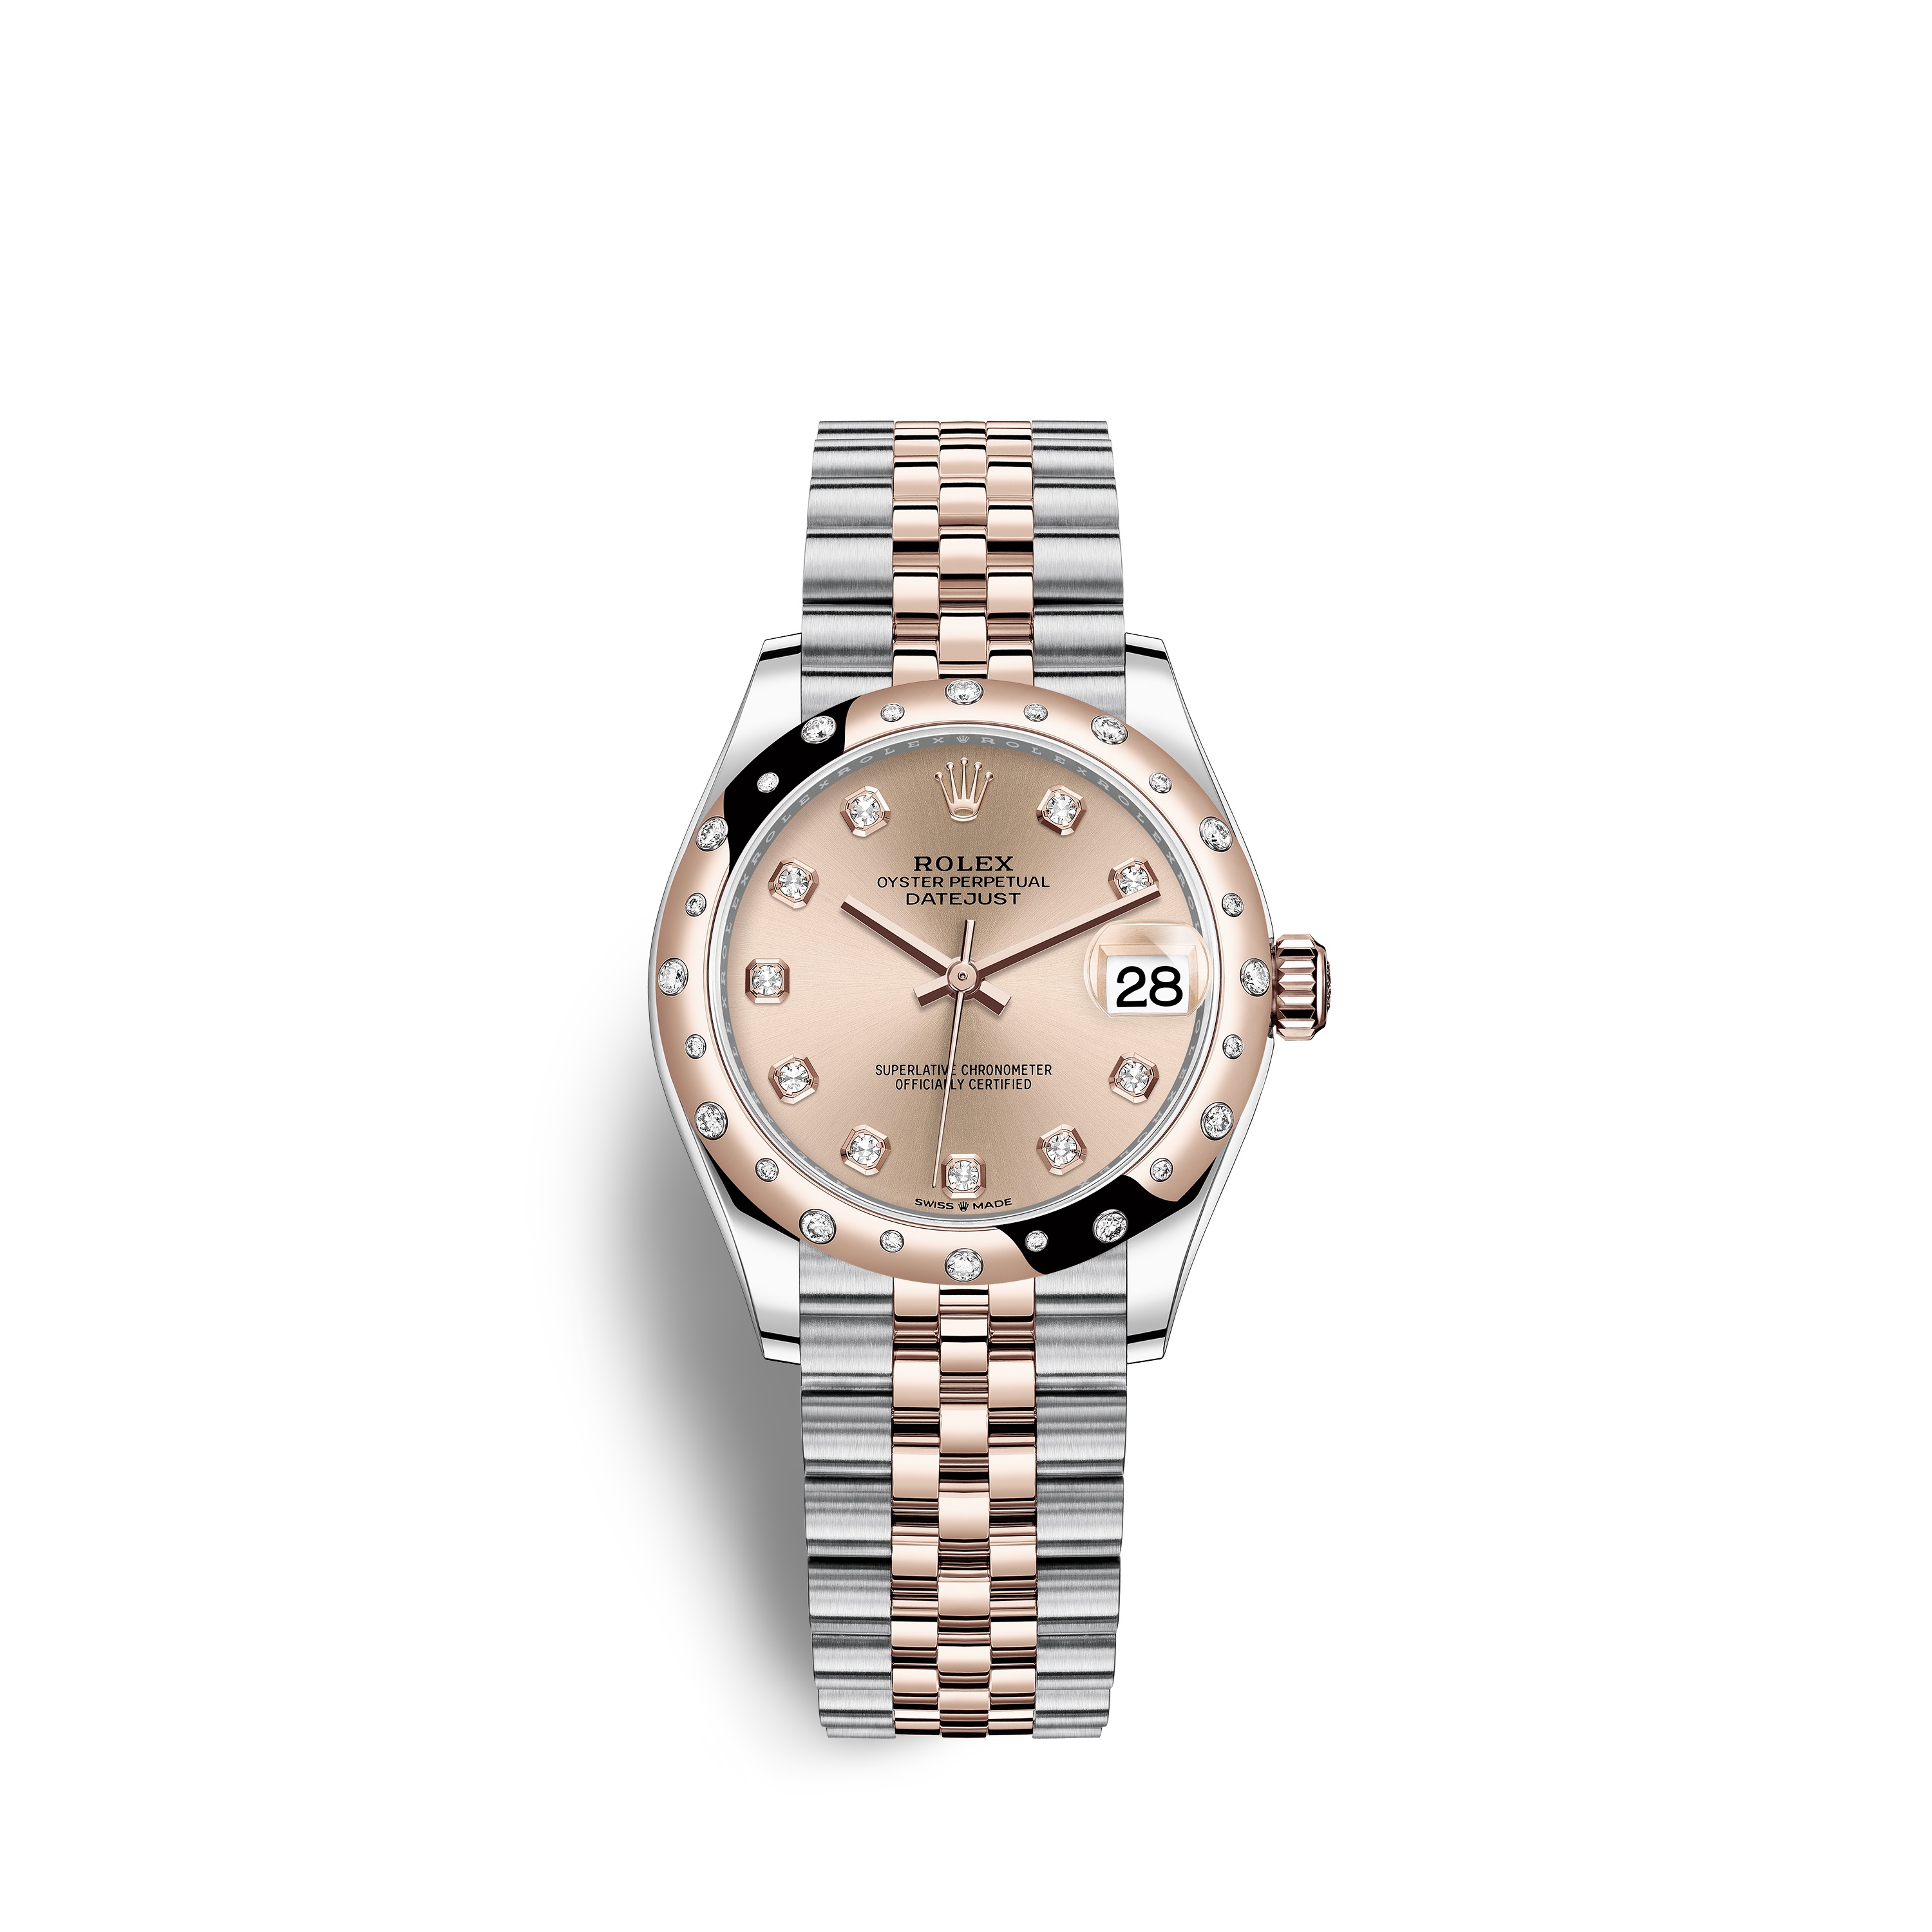 Datejust 31 278341RBR Rose Gold, Stainless Steel & Diamonds Watch (Rosé Colour Set with Diamonds)